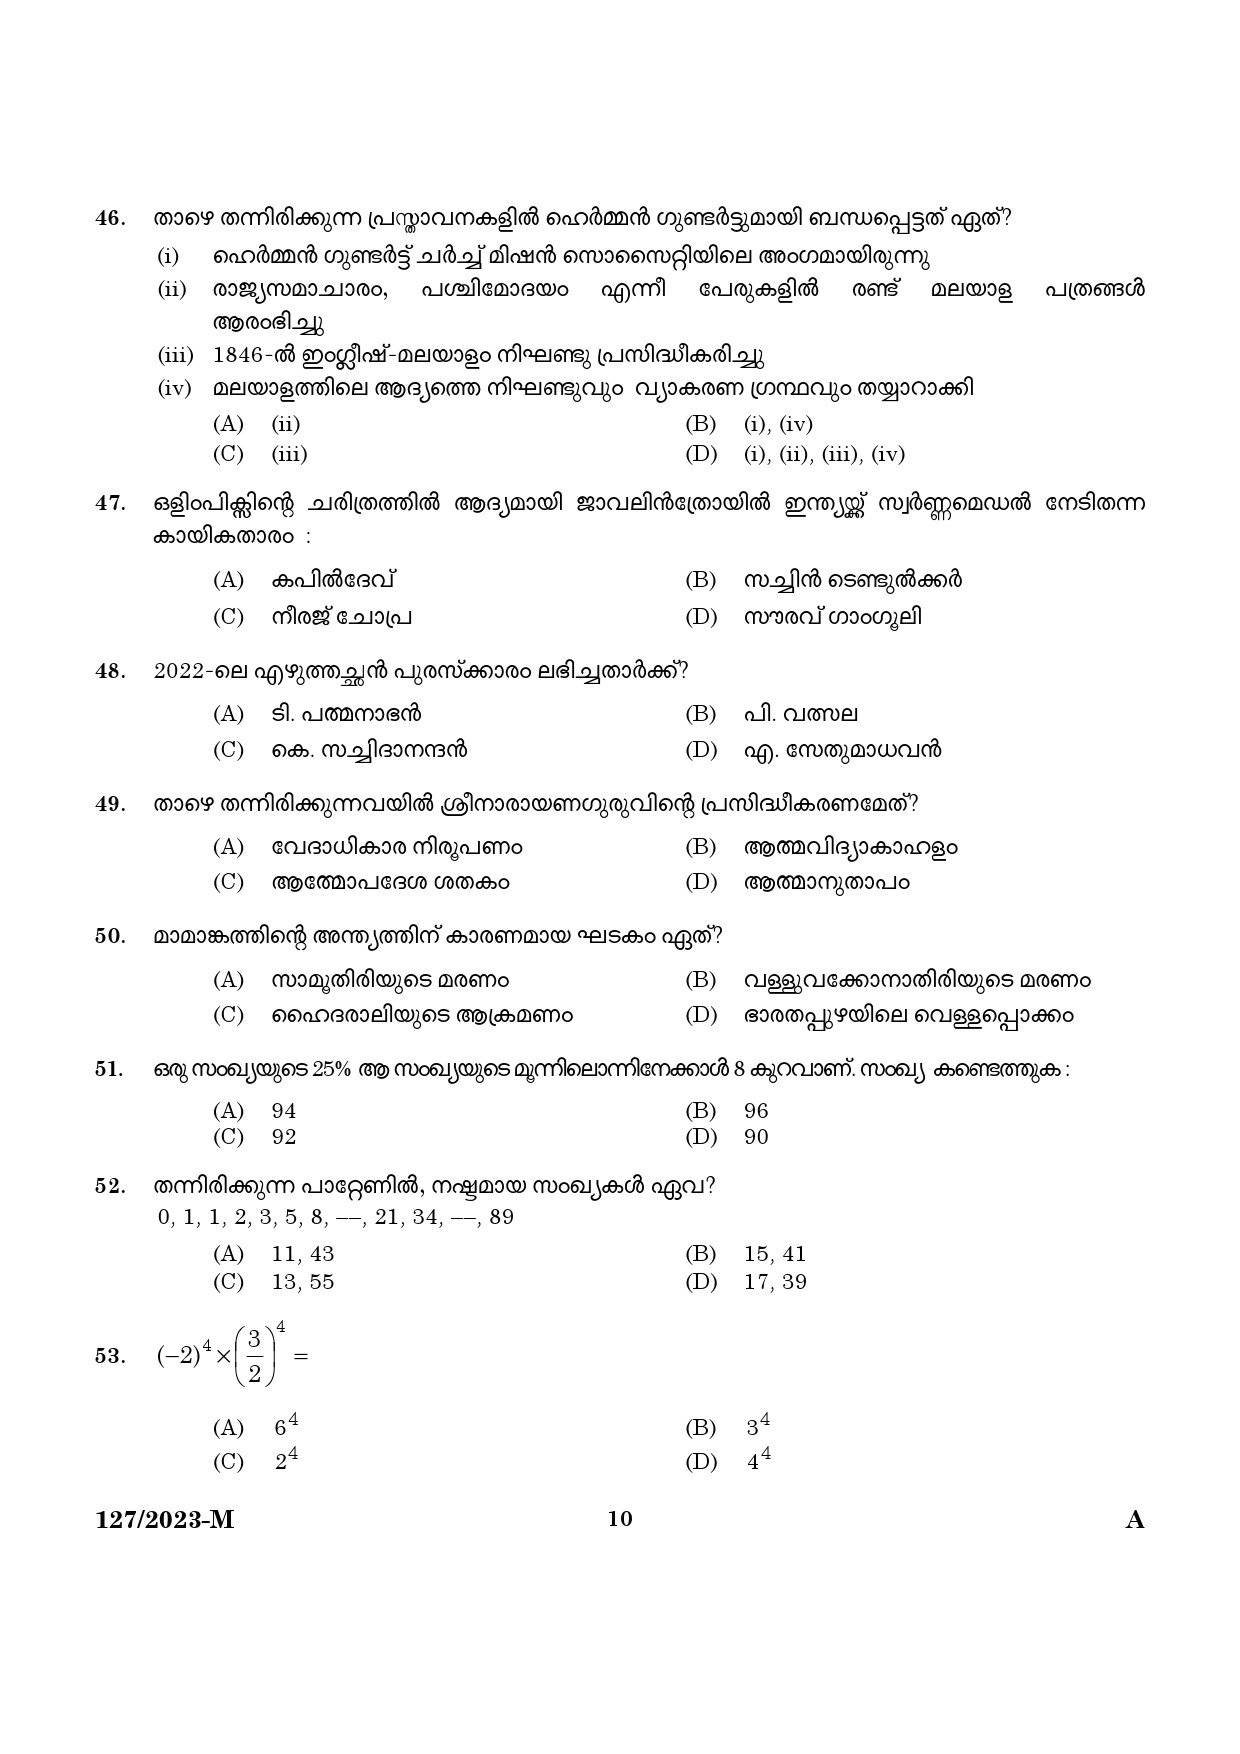 KPSC Police Constable Armed Police Battalion Malayalam Exam 2023 Code 1272023 M 8